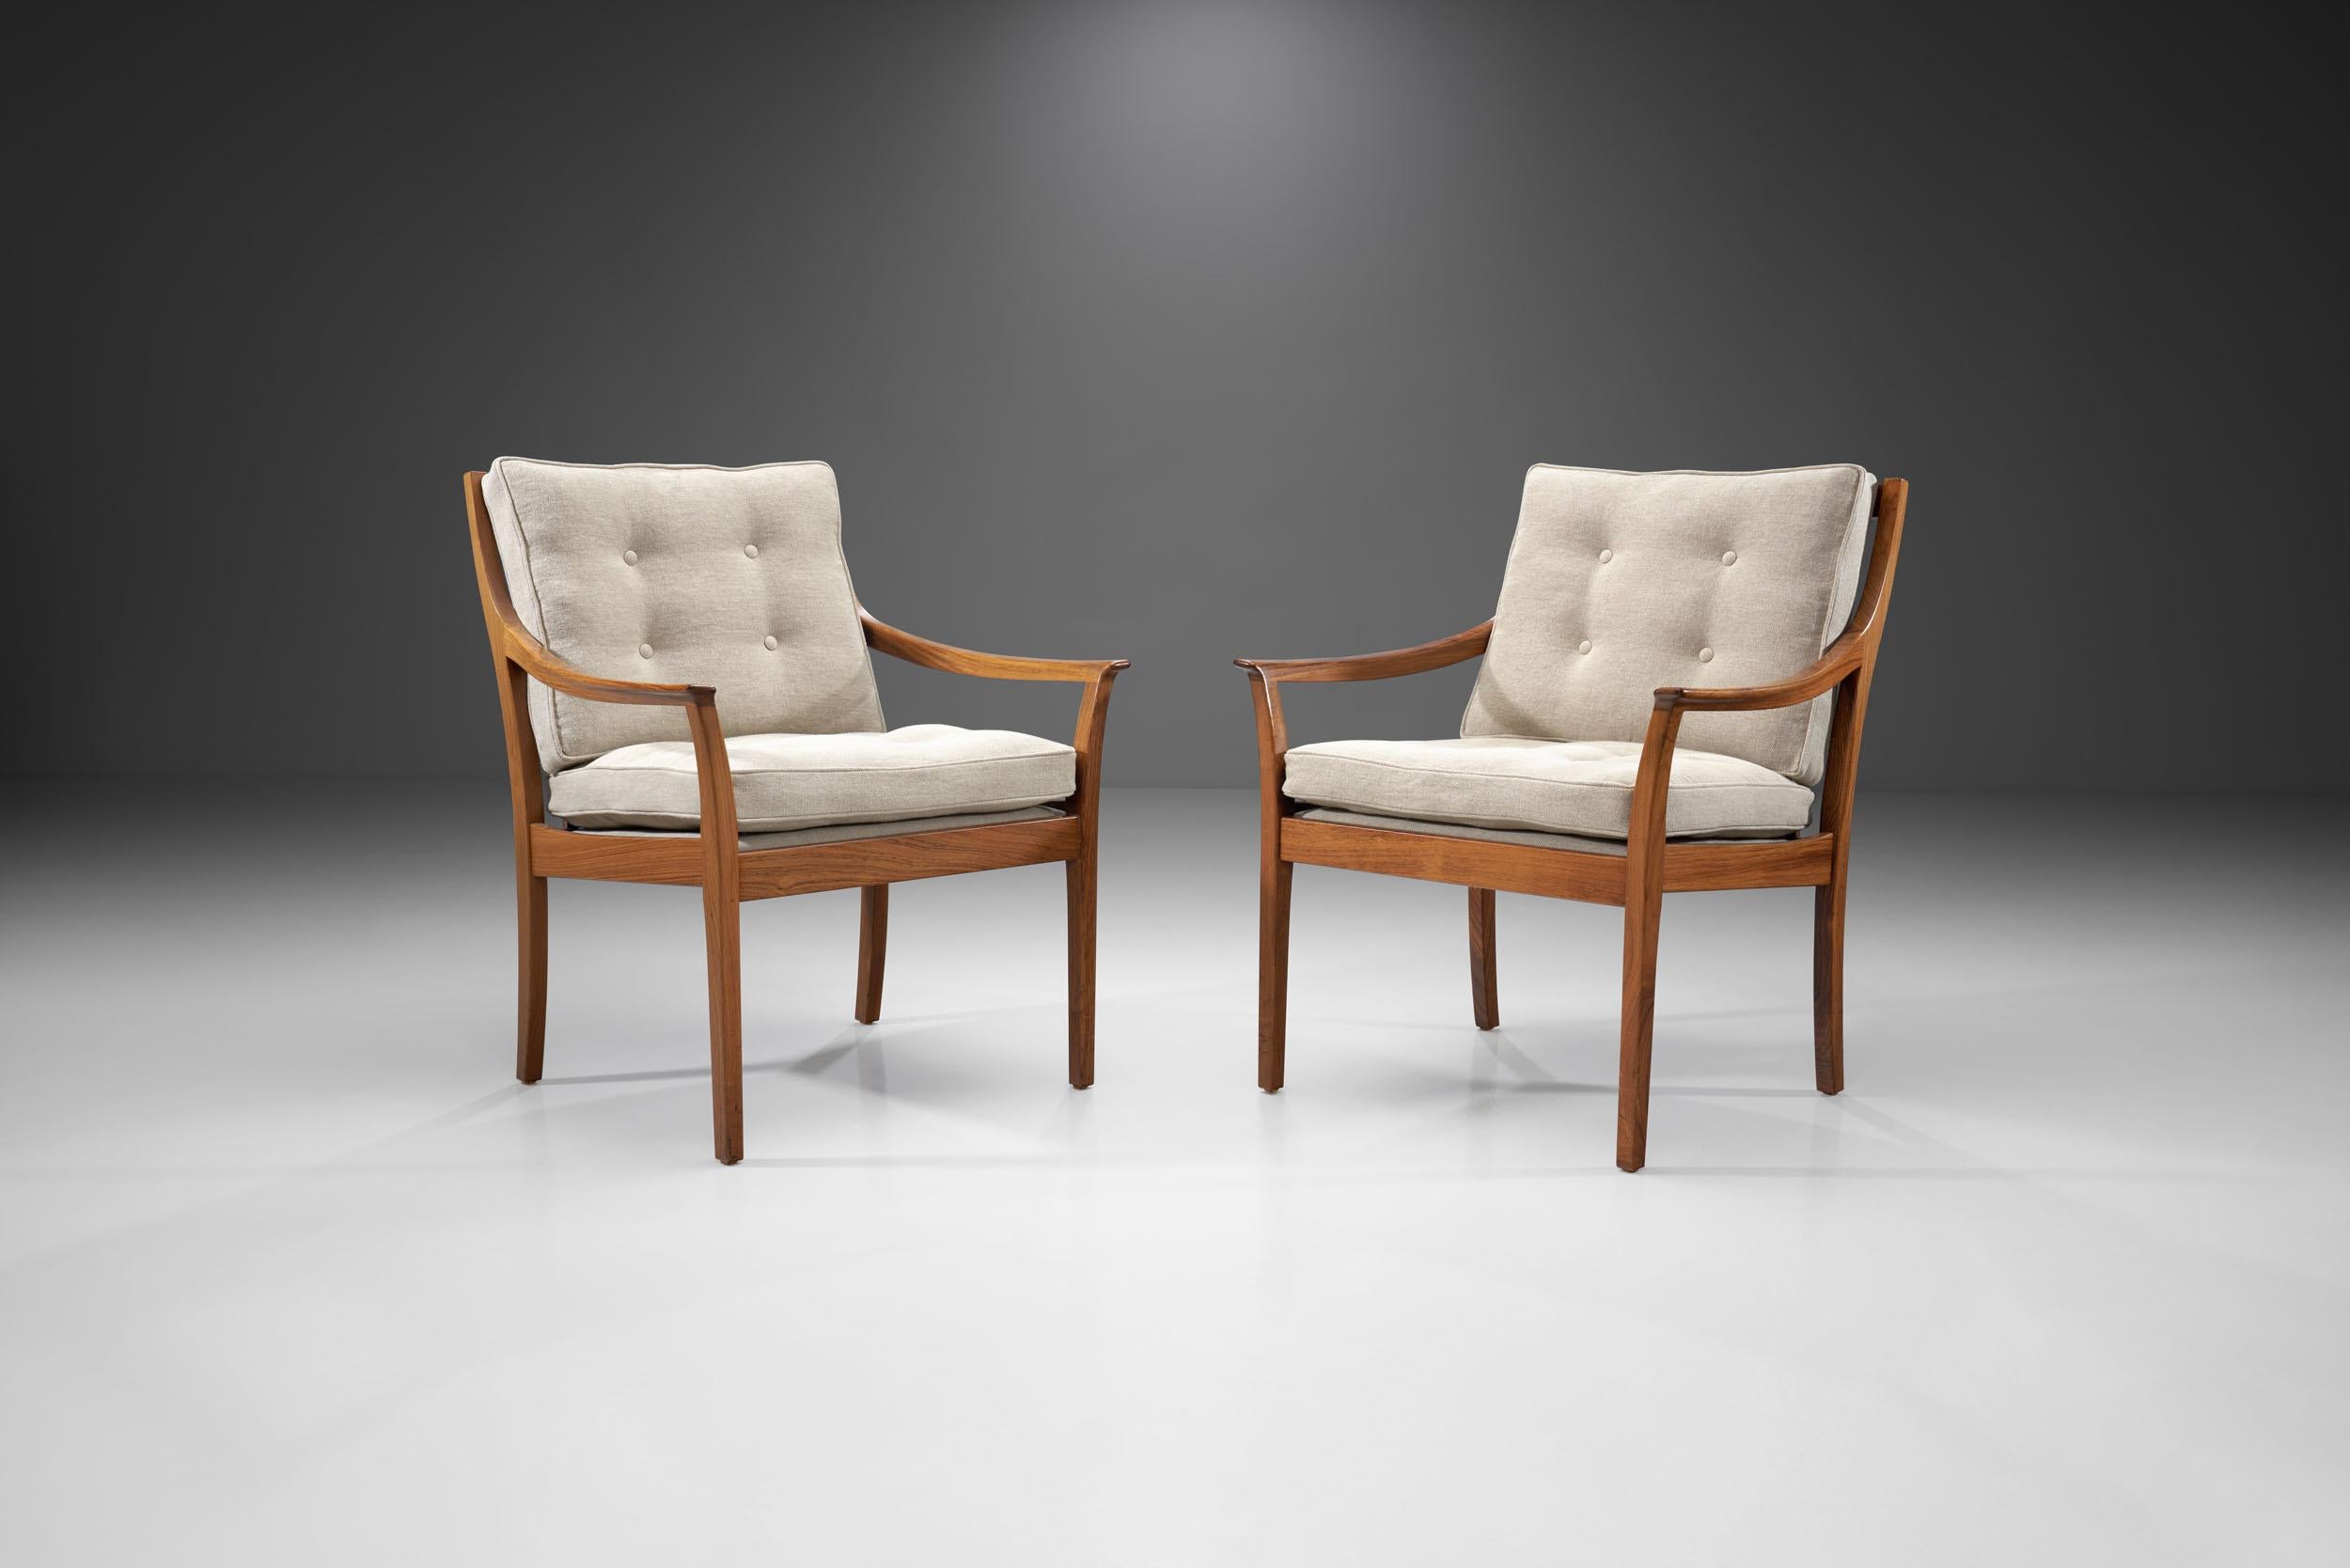 This rare pair of wood “Vinett” armchairs was created by Jackie Kennedy’s favorite Norwegian designer, Torbjørn Afdal. His Norwegian designs impressed not only the former First Lady, but the Japanese Emperor and the Prime Minister Gro Harlem